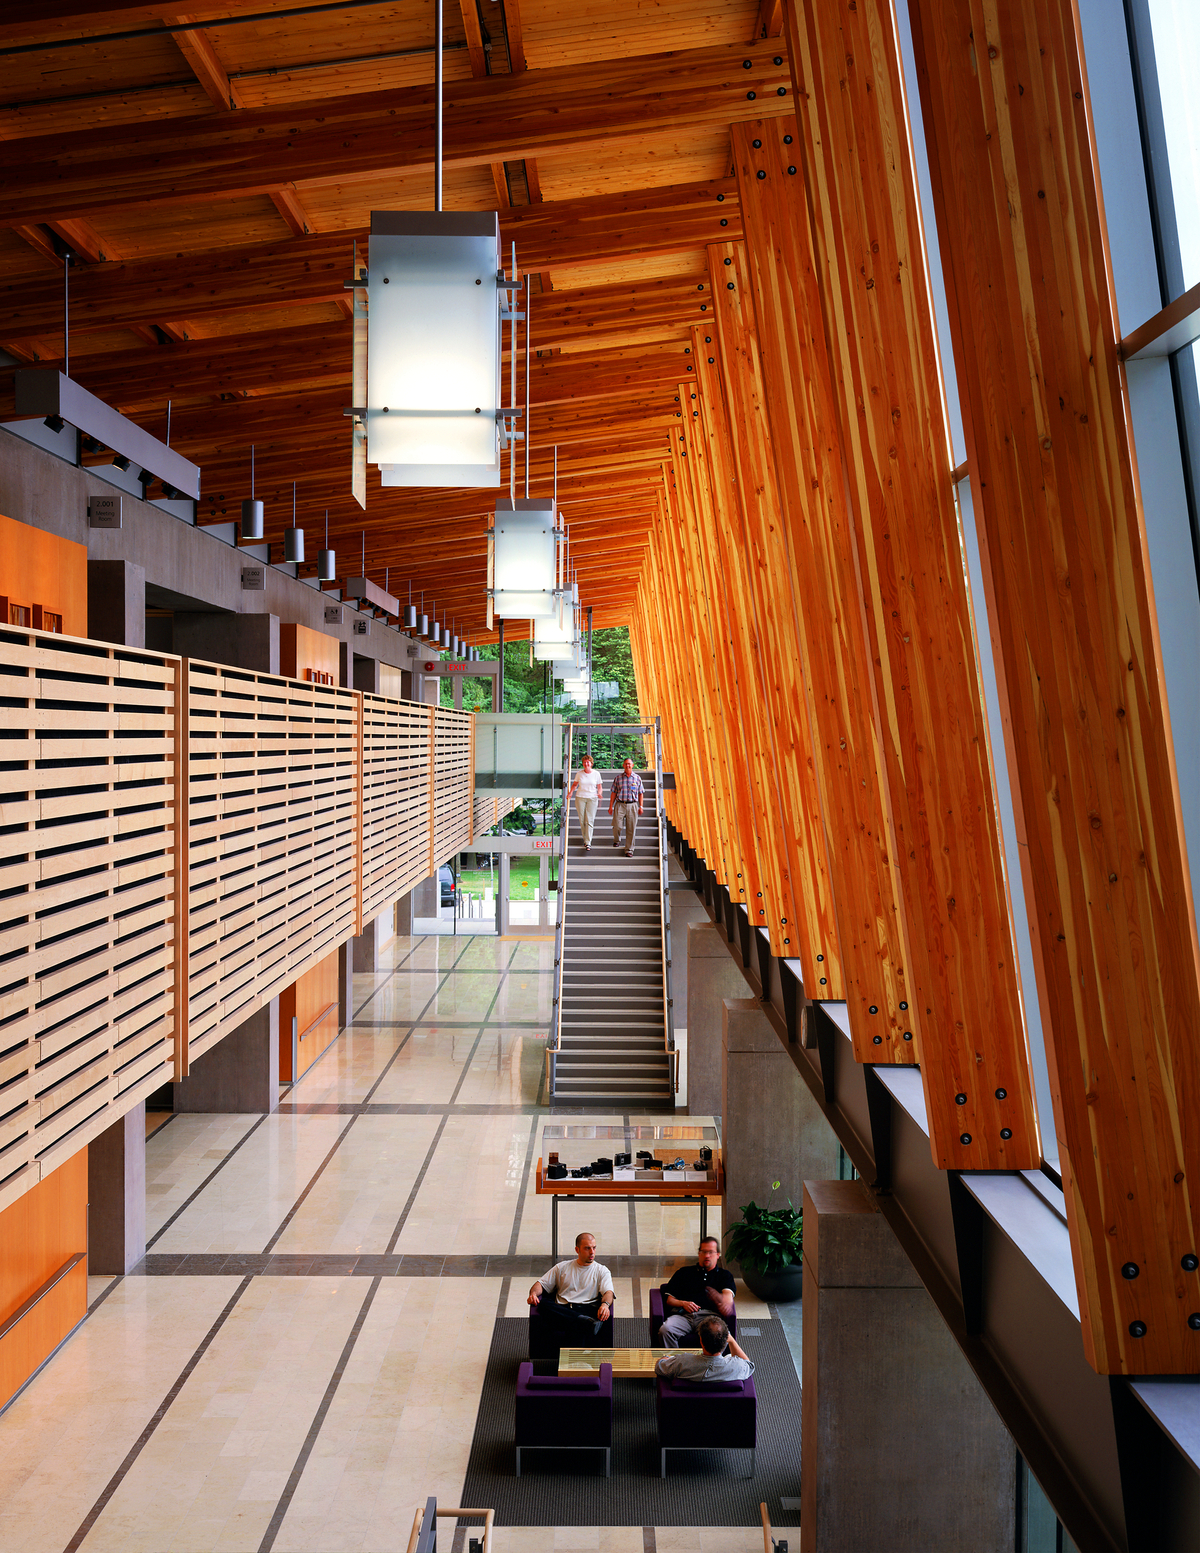 Interior daytime view of Richmond City Hall three-storey galleria showing use of Glue-laminated timber (Glulam) beams and columns supporting expansive solid-sawn heavy timber decking roof